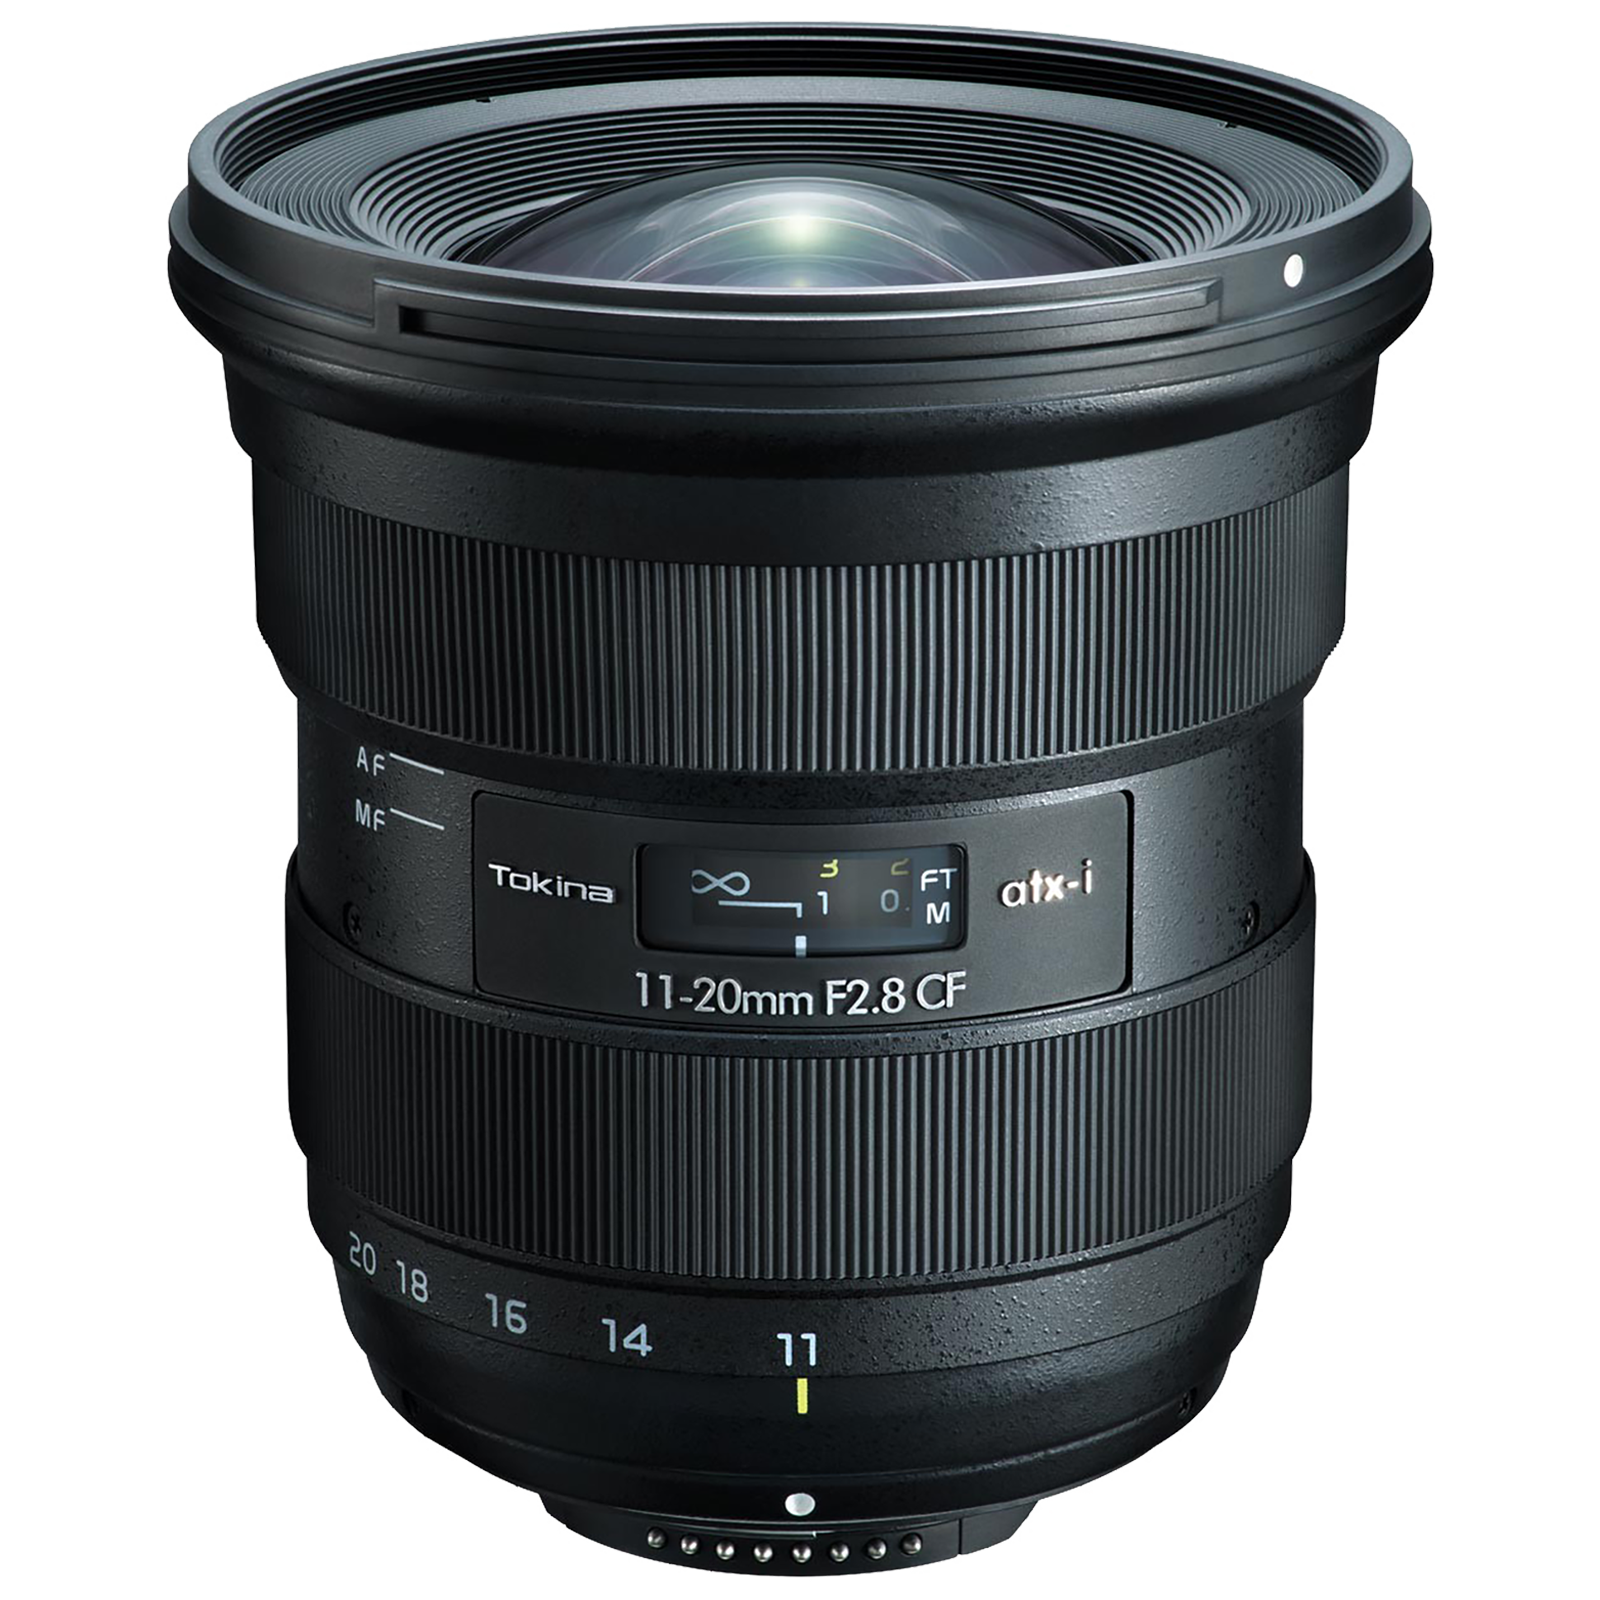 Tokina Atx-i 11-20mm f/22 - f/2.8 Wide-Angle Zoom Lens for Canon EF Mount (One-touch Focus Clutch Mechanism)